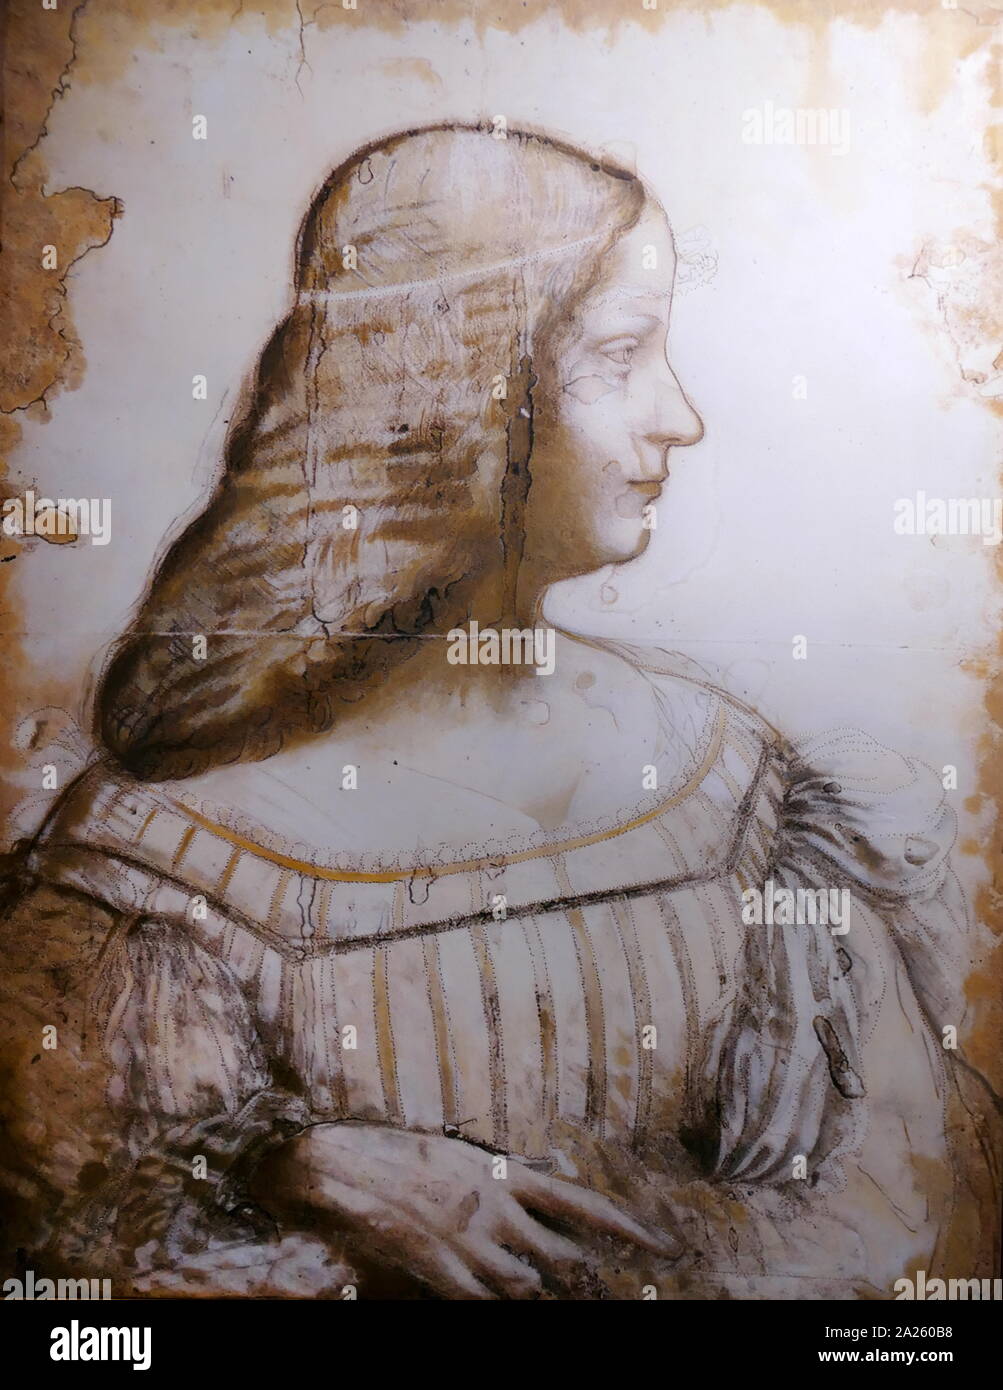 Portrait drawing of Isabella d'Este, in charcoal and pastel; 1500, by Leonardo da Vinci (1452-1519), Italian artist and polymath; Isabella d'Este (1474 - 1539) Marchioness of Mantua; one of the leading women of the Italian Renaissance as a major cultural and political figure. Stock Photo